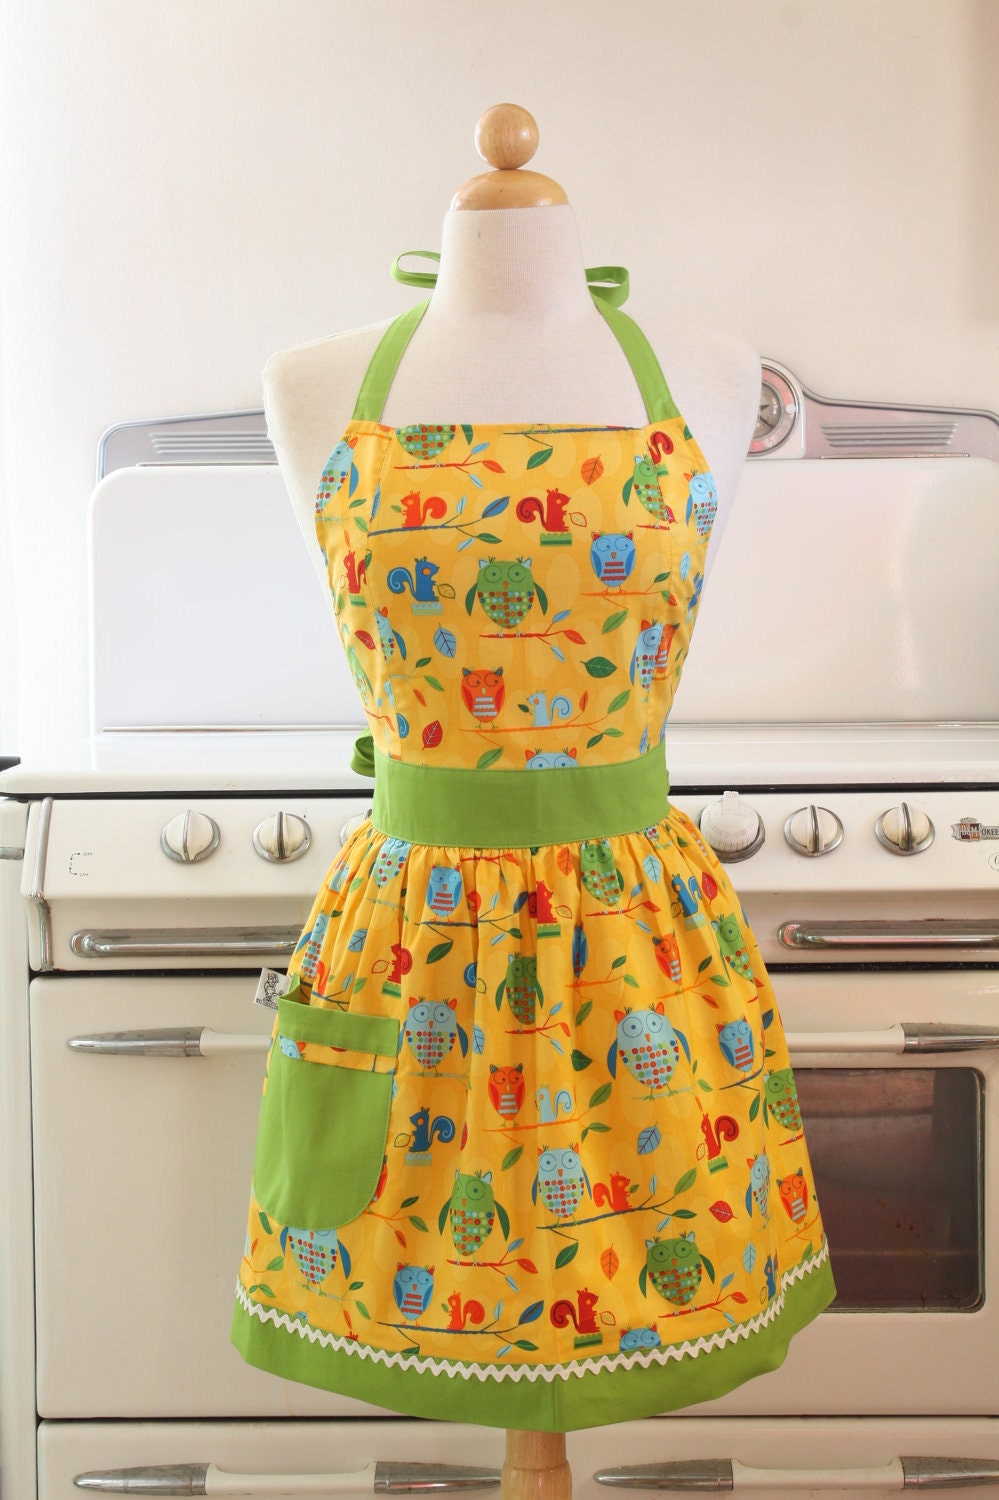 Retro Apron Squirrels and Owls Vintage Inspired Full Apron - CHLOE